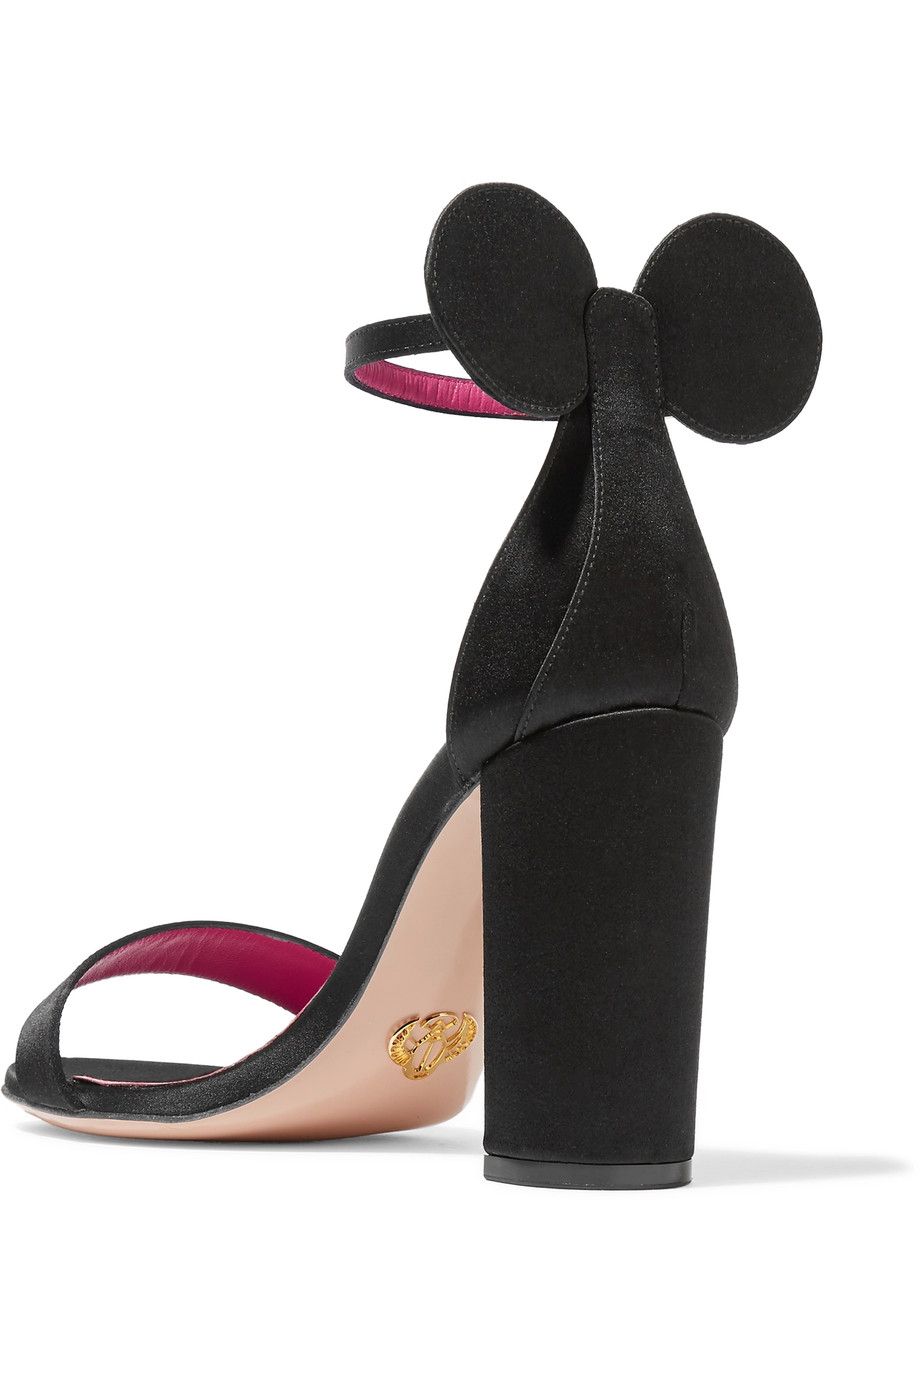 These Minnie-Mouse Inspired Heels Are 